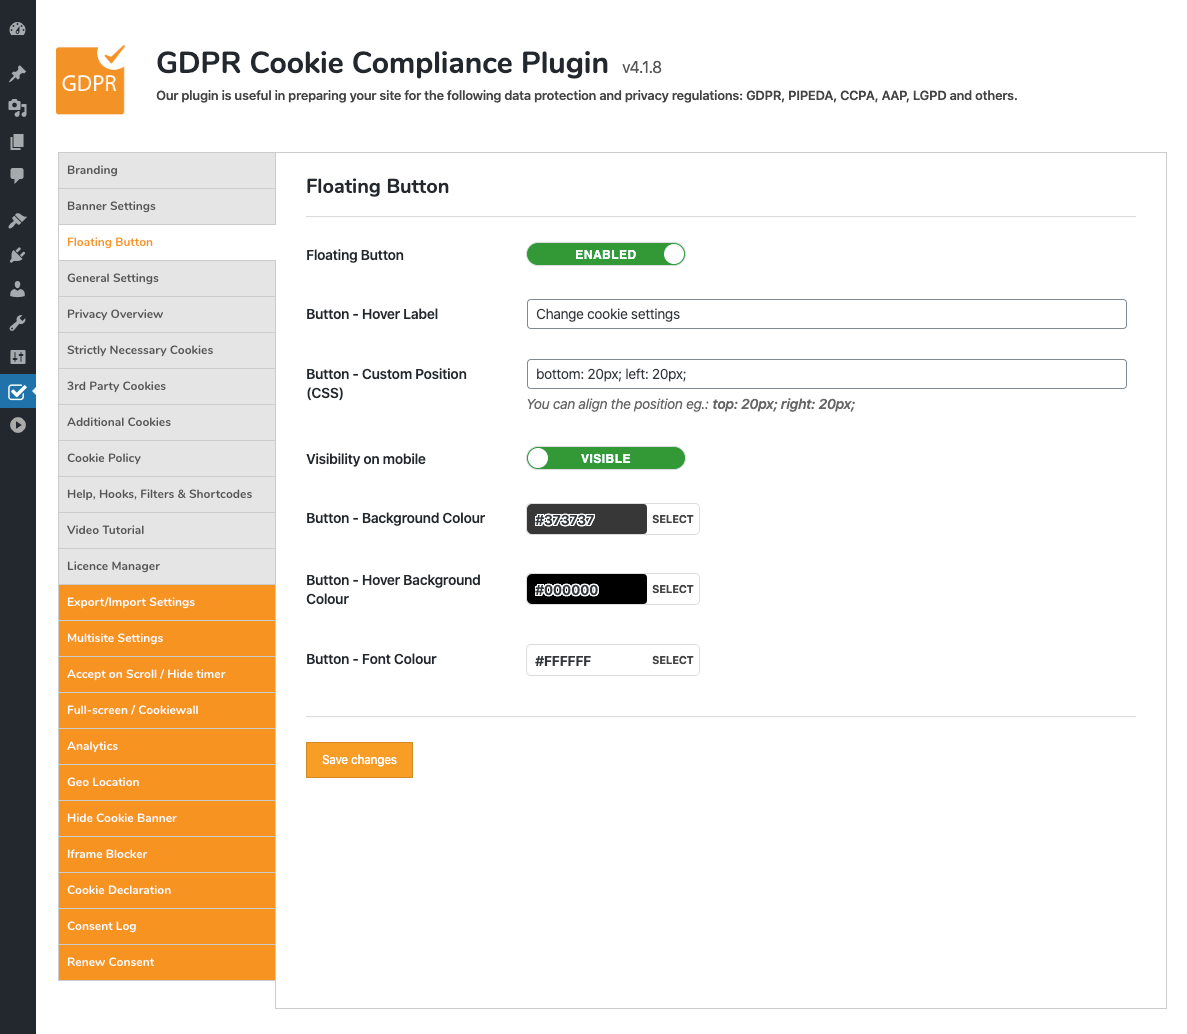 GDPR Cookie Compliance - Admin - Floating Button